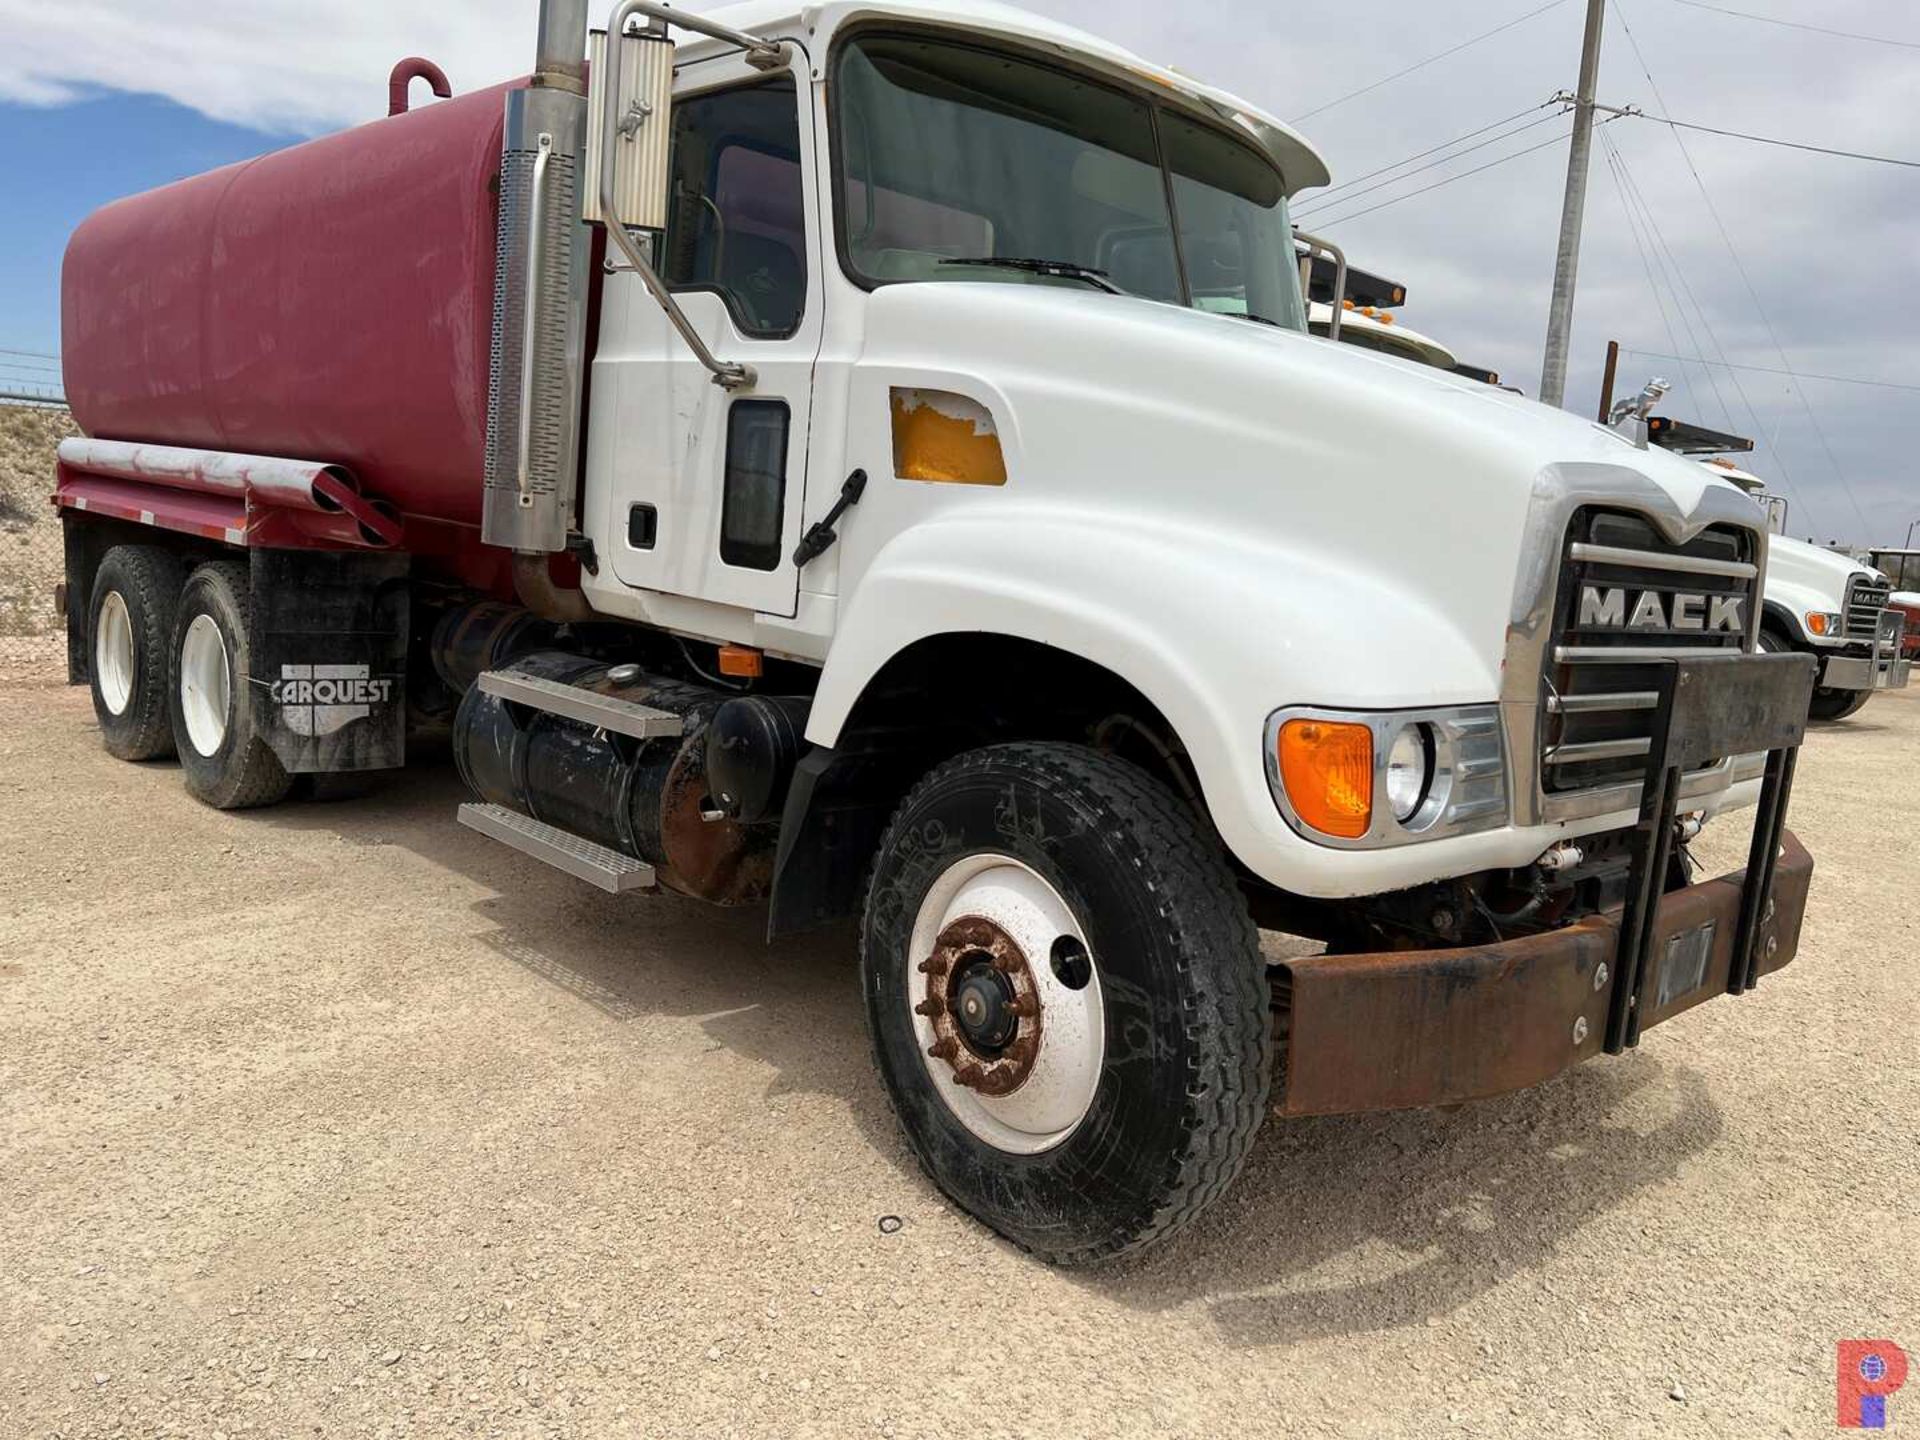 2005 MACK CV713 T/A WATER TRUCK - Image 2 of 24